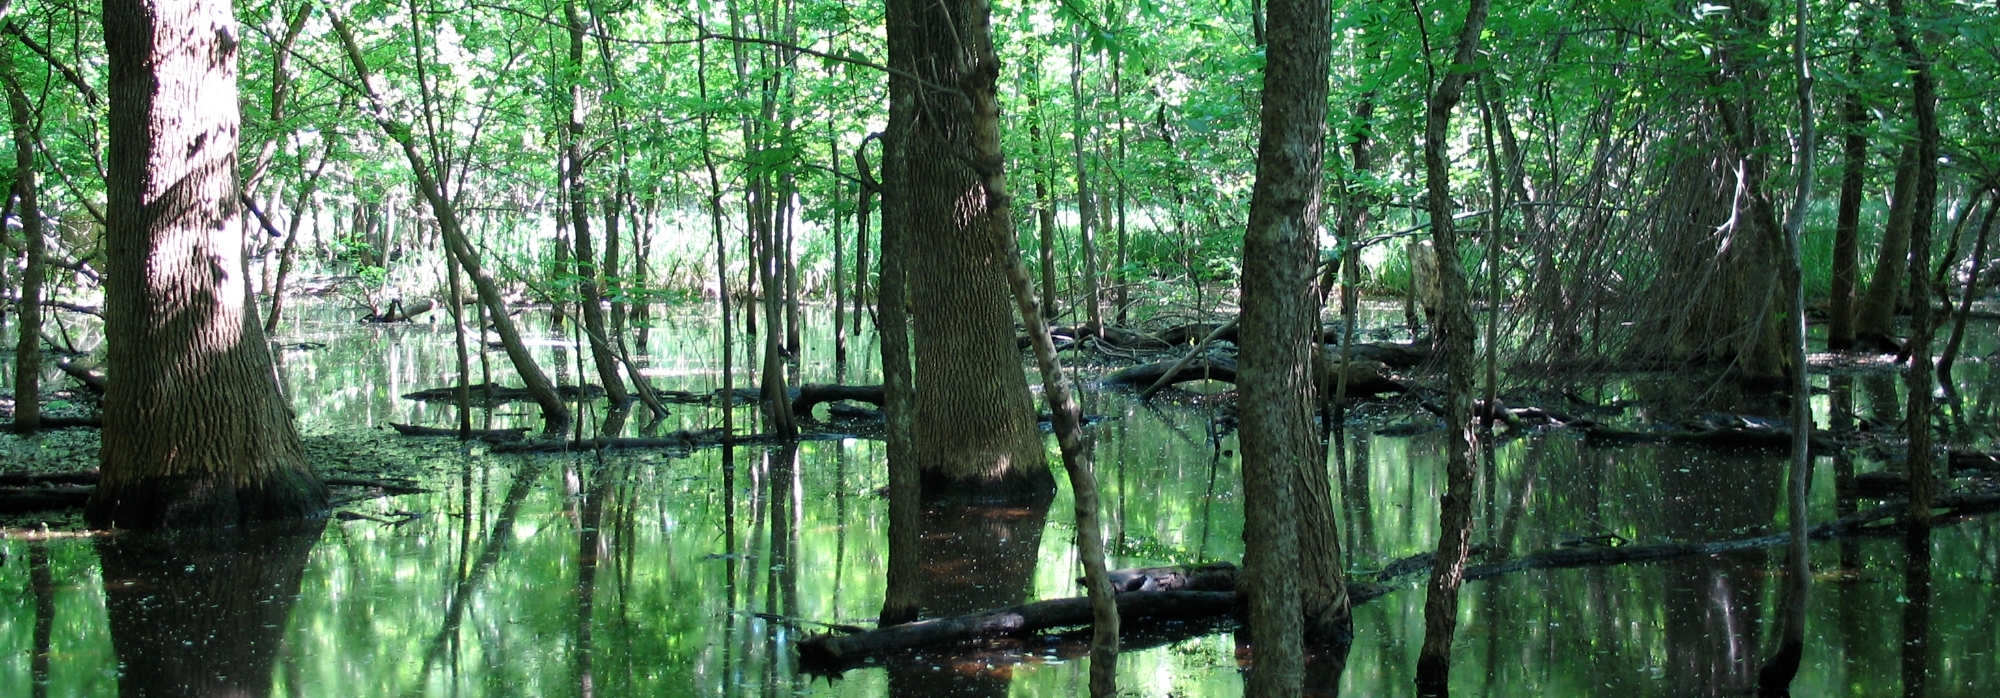 Flooded bottomland forest of Oliver's Woods Natural Area